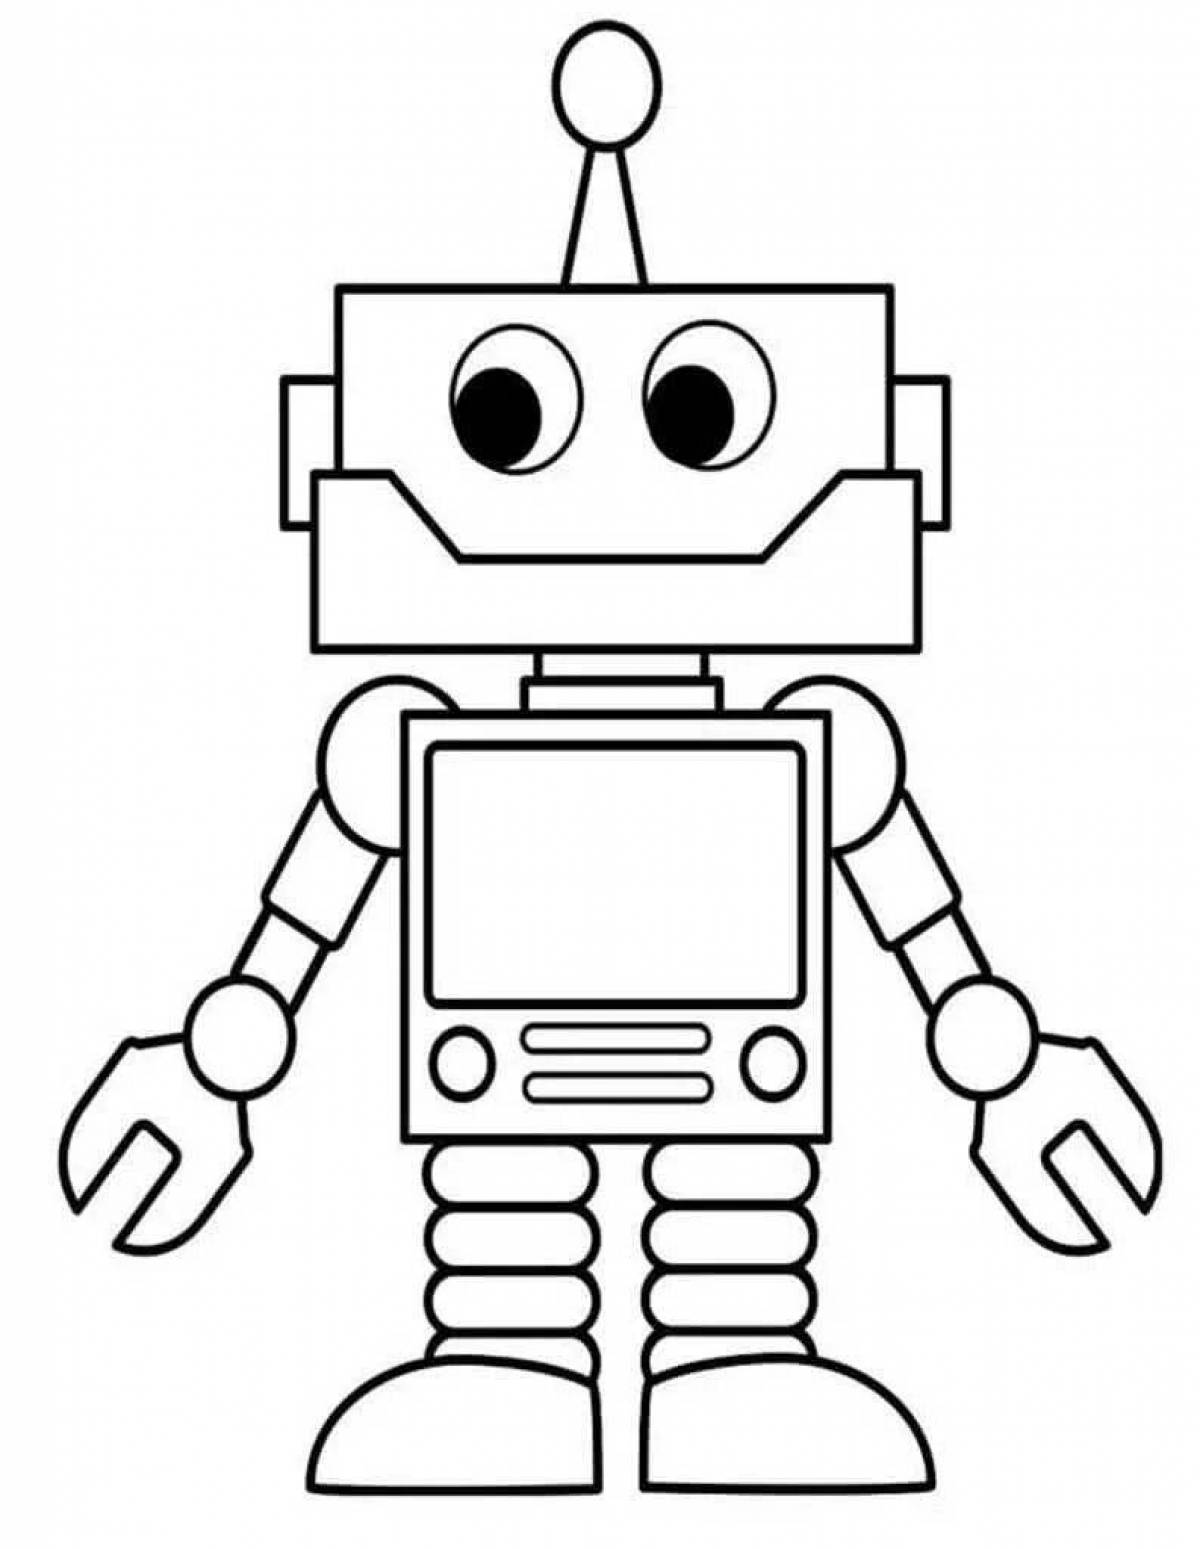 Robots for children 5 7 years old #9